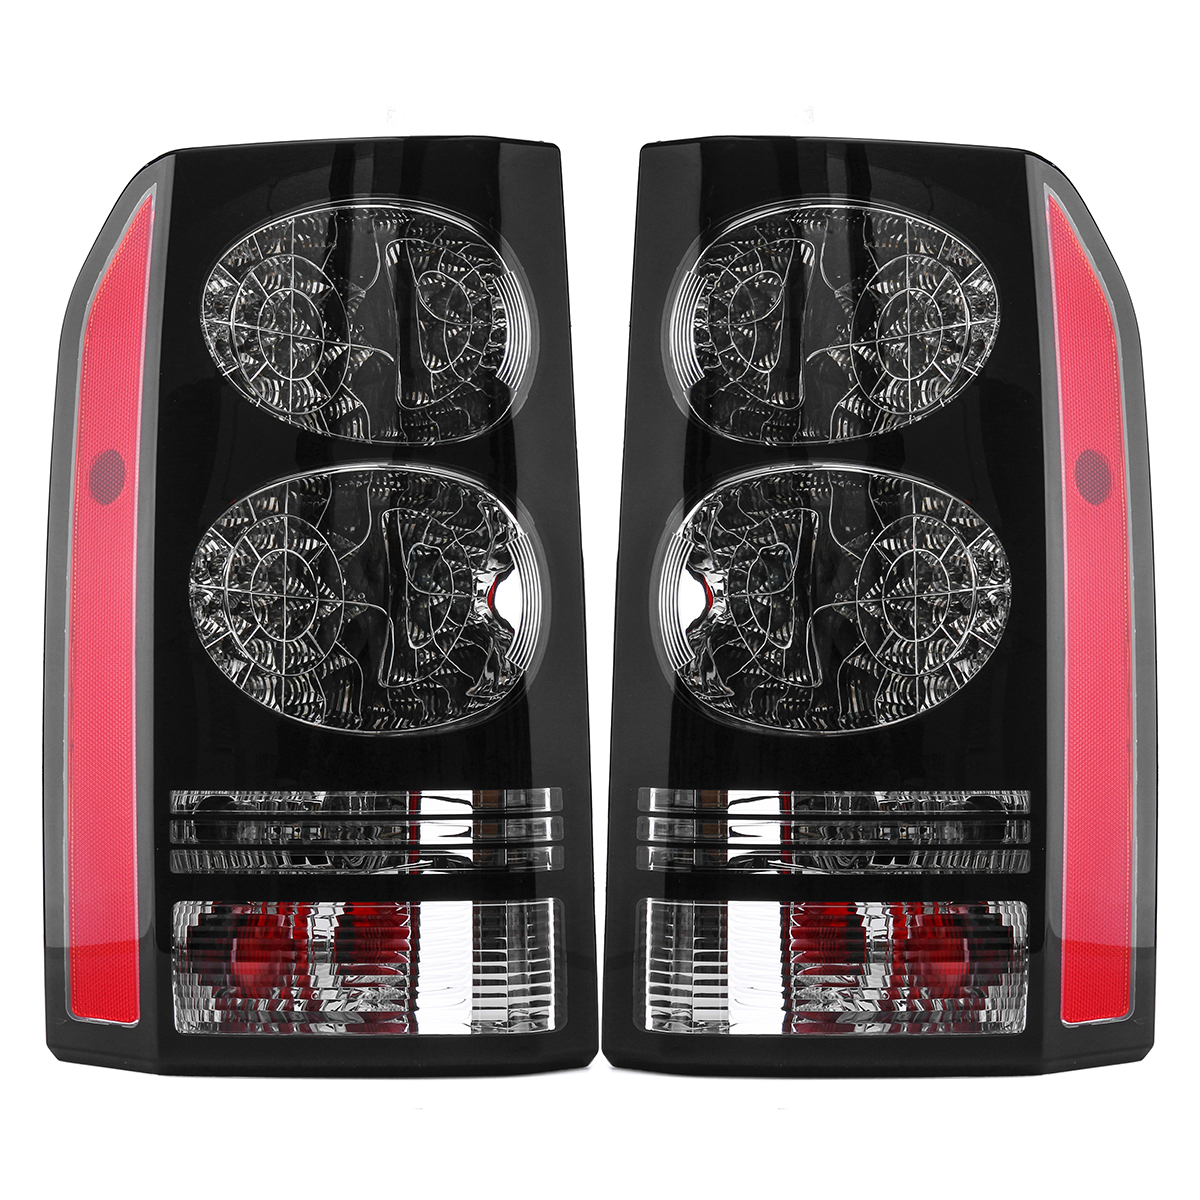 

New Rear Tail Brake Lights Lamps FOR LAND ROVER DISCOVERY 3 & 4 2004-2014